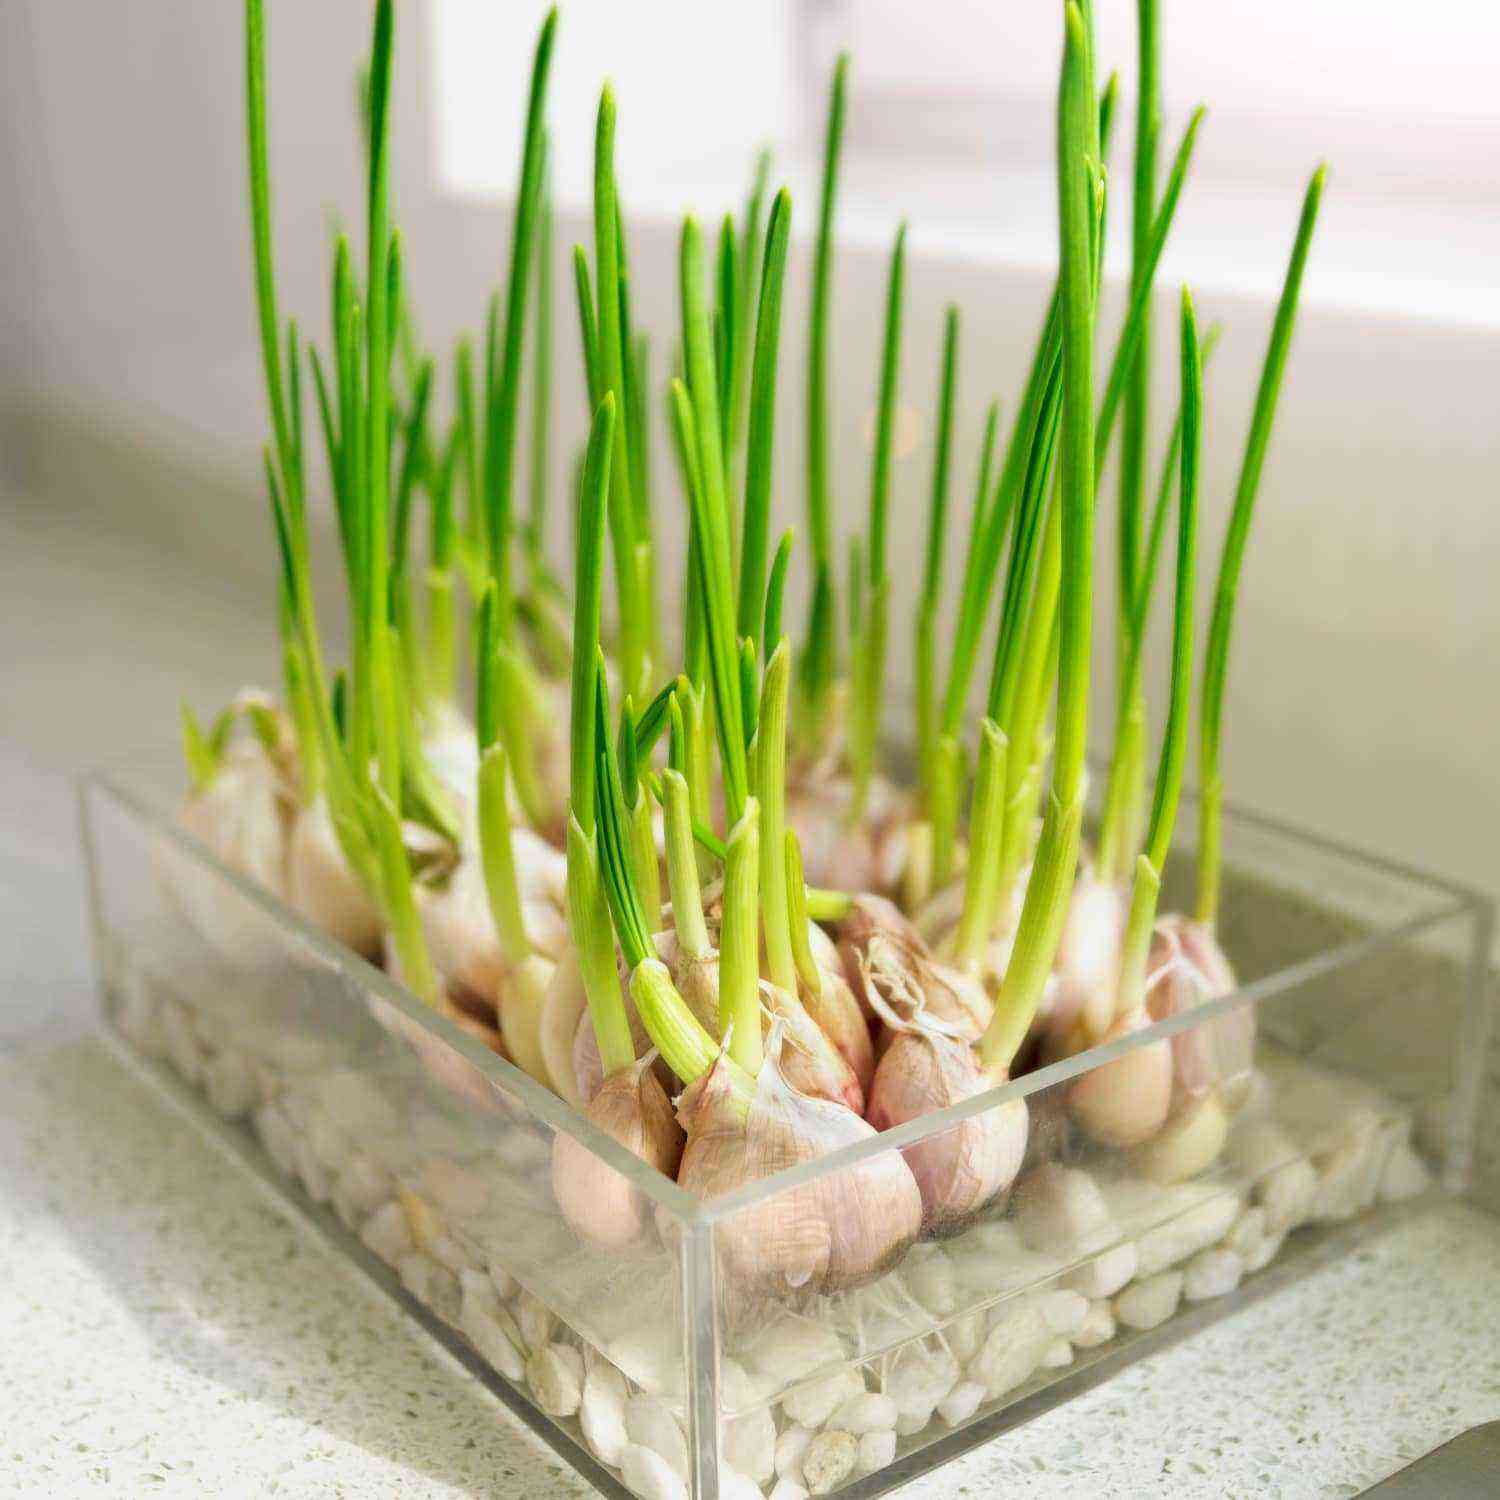 How to plant garlic?